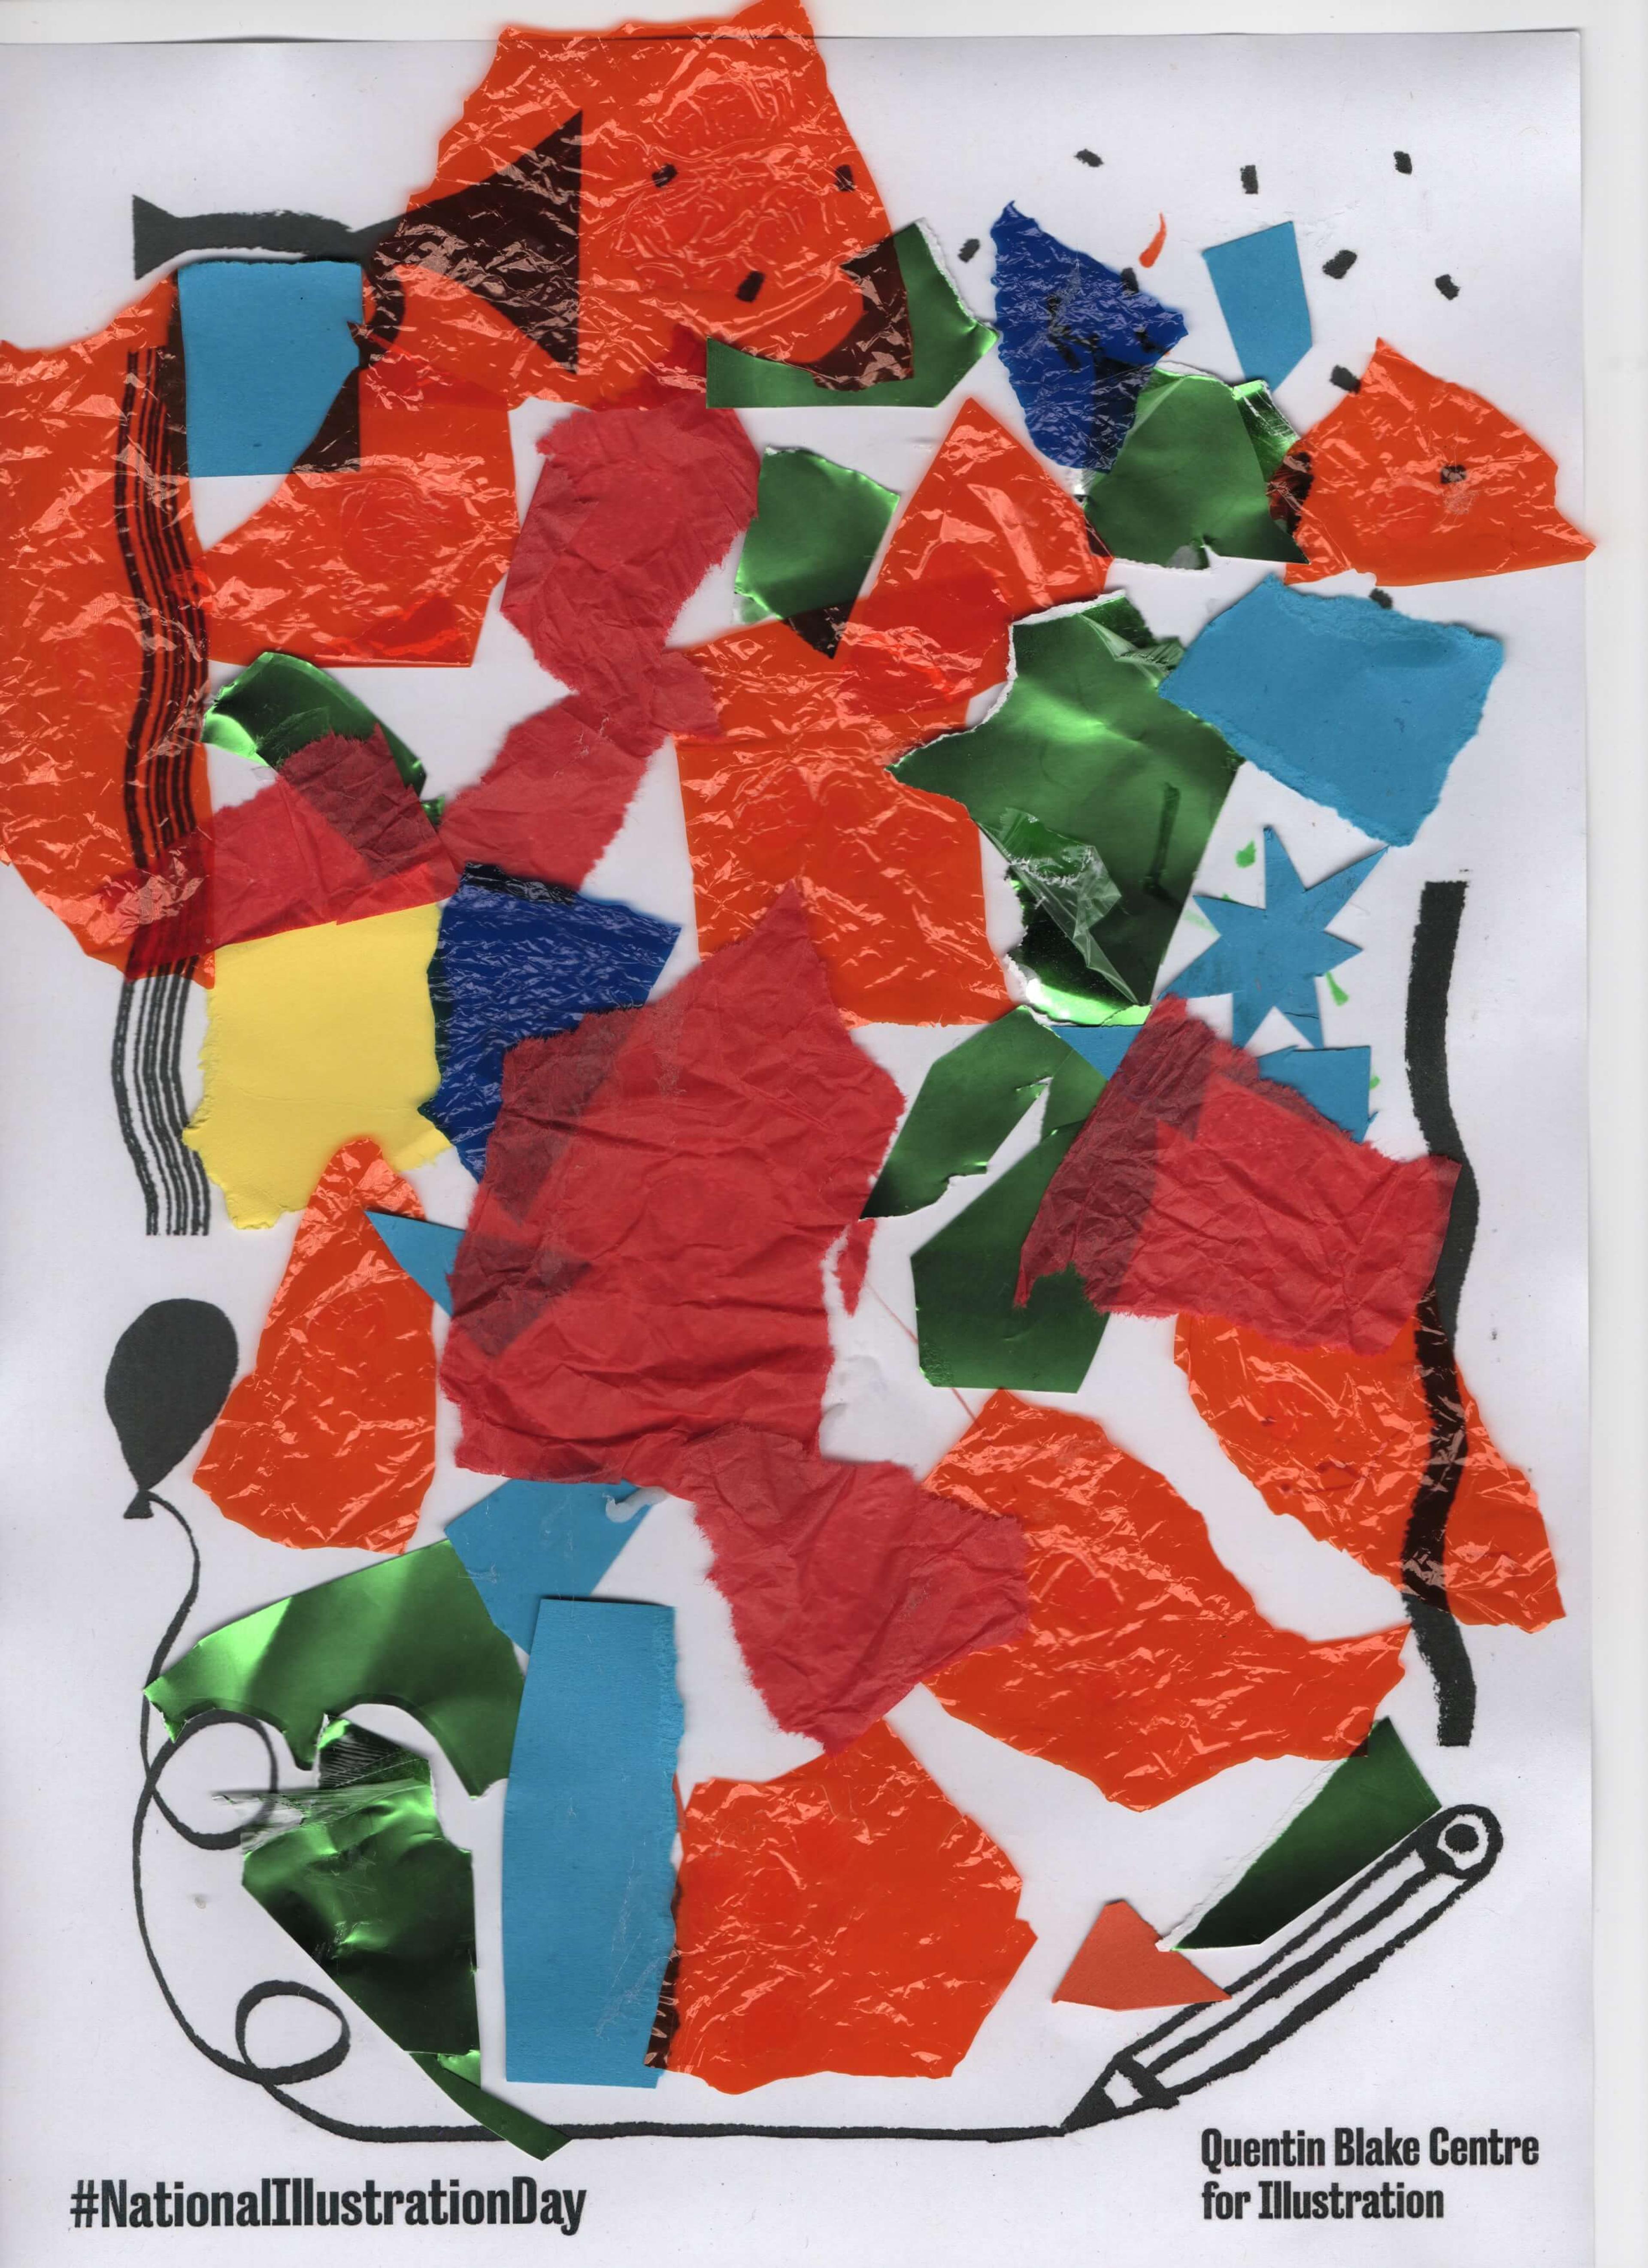 A colourful abstract collage made using many torn pieces of paper.